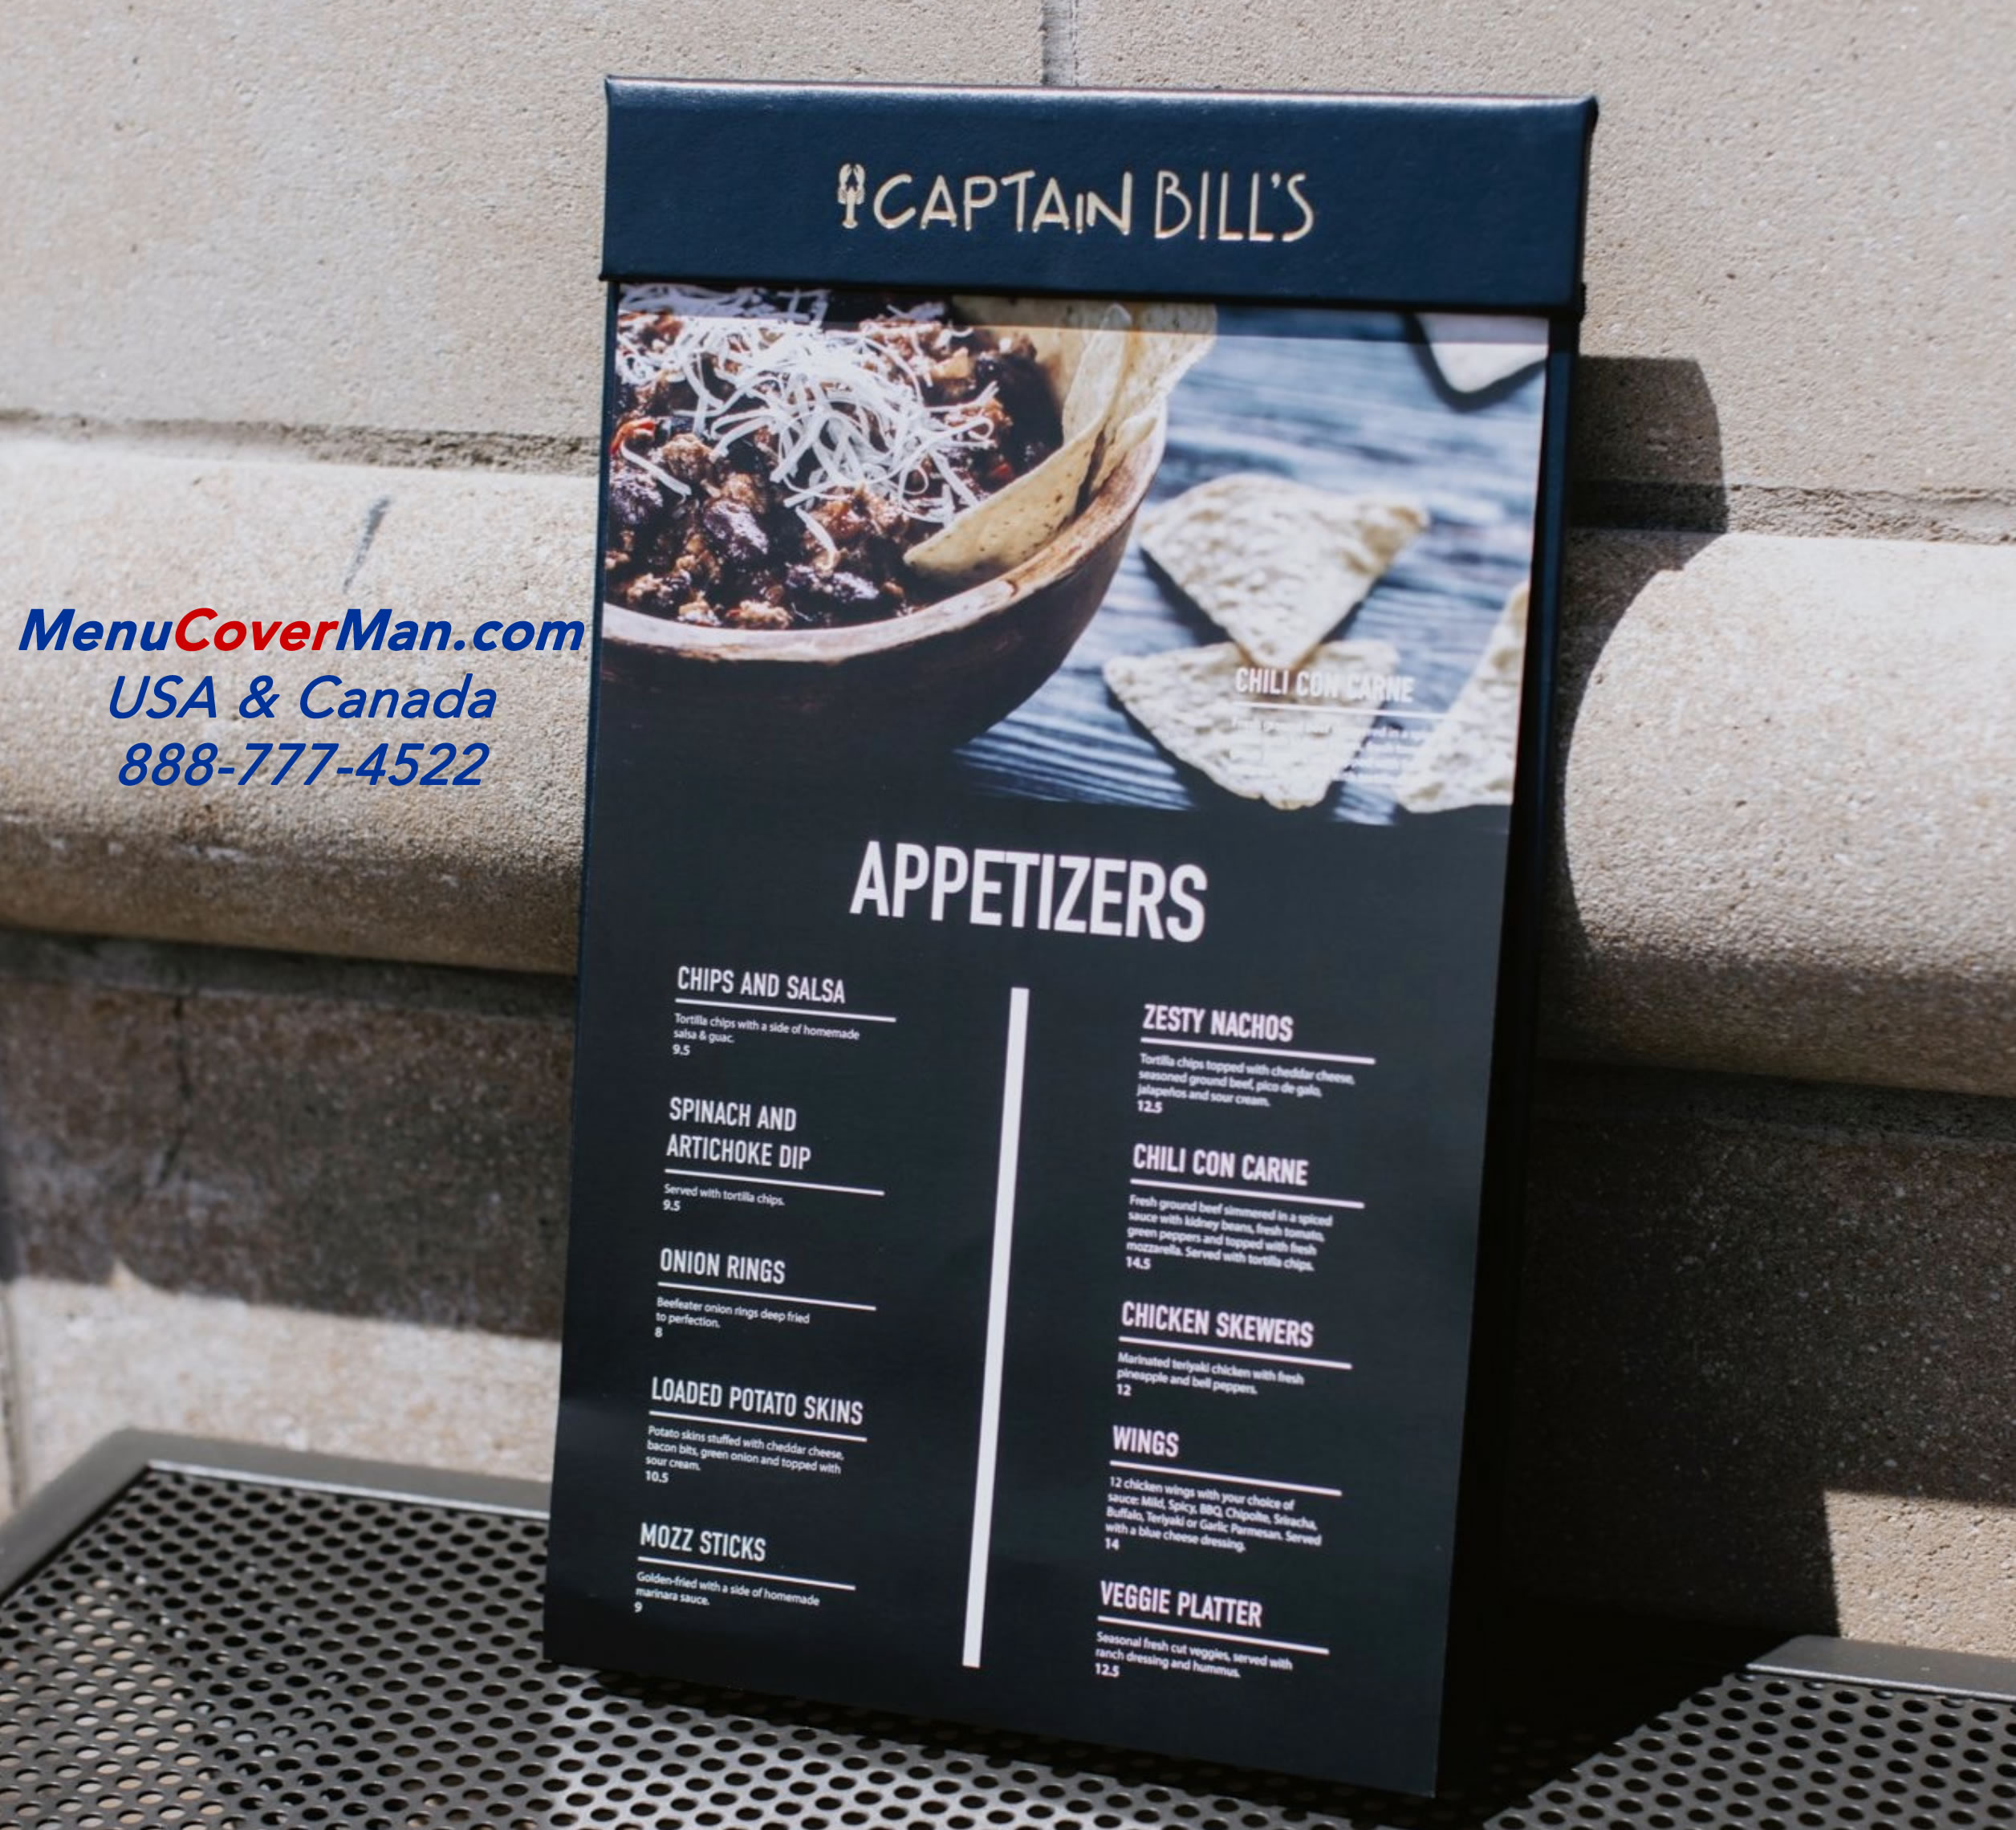 Magnetic Menu Board - Call 888-777-4522 in the USA and Canada to place your valued order today!